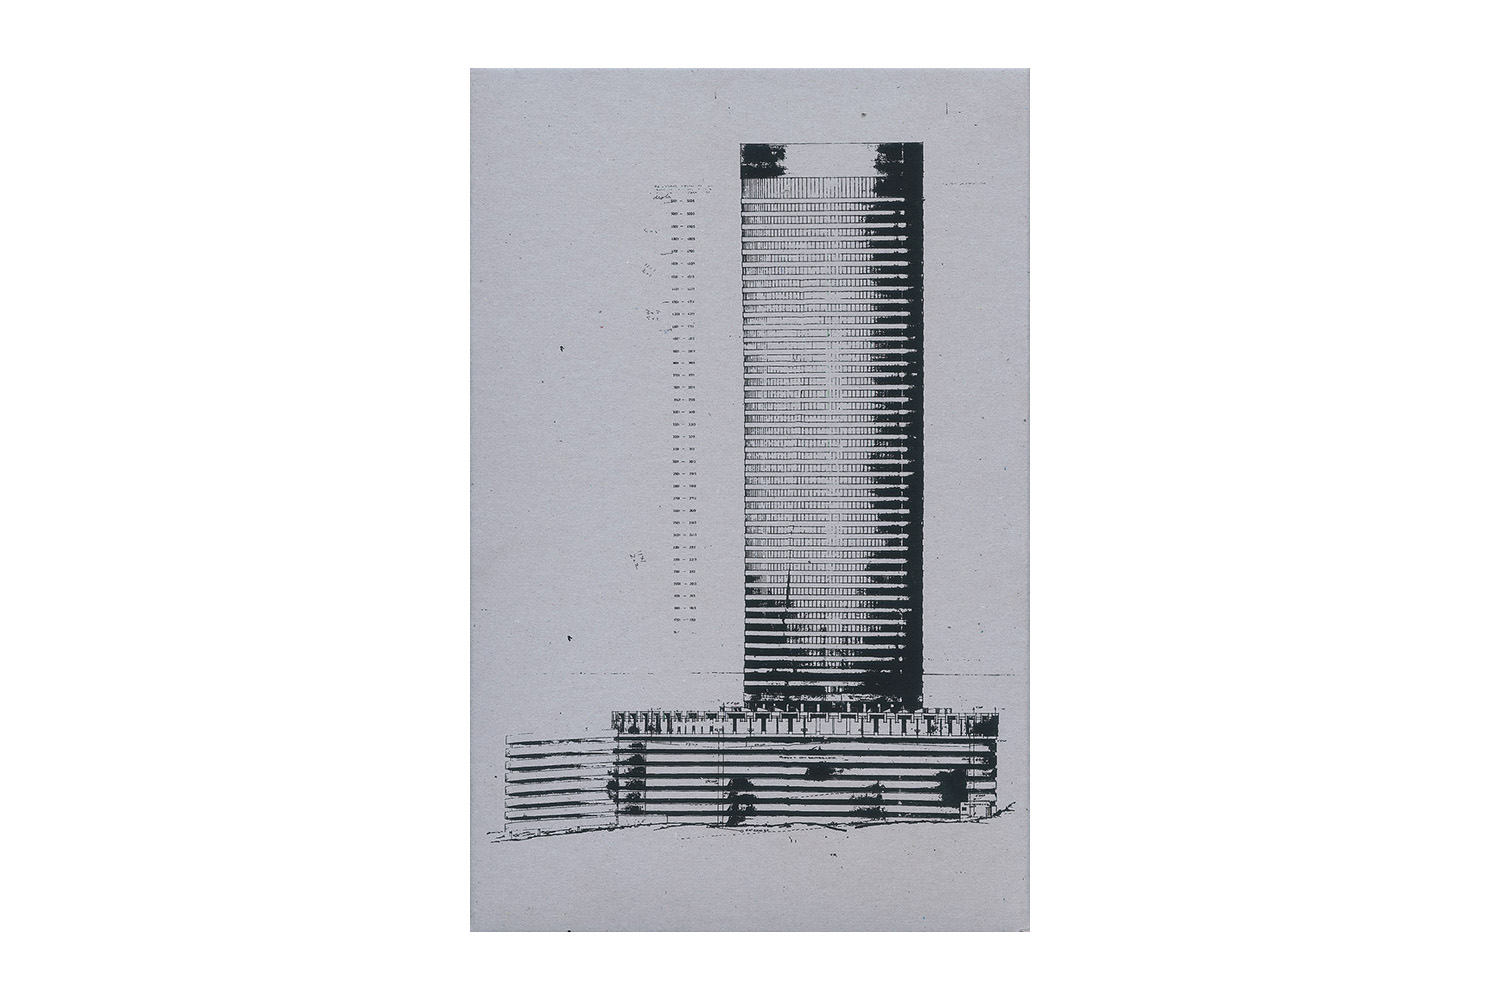 Michael Subotsky &amp; Patrick Waterhouse's Ponte City published by Steidl
                              A collection of images of Ponte City, an enormous apartment complex in Johannesburg, South Africa. An exhaustive visual, historical and analytical examination of every resident, every doorway, and conceivable angle of the largest residential building in Africa.